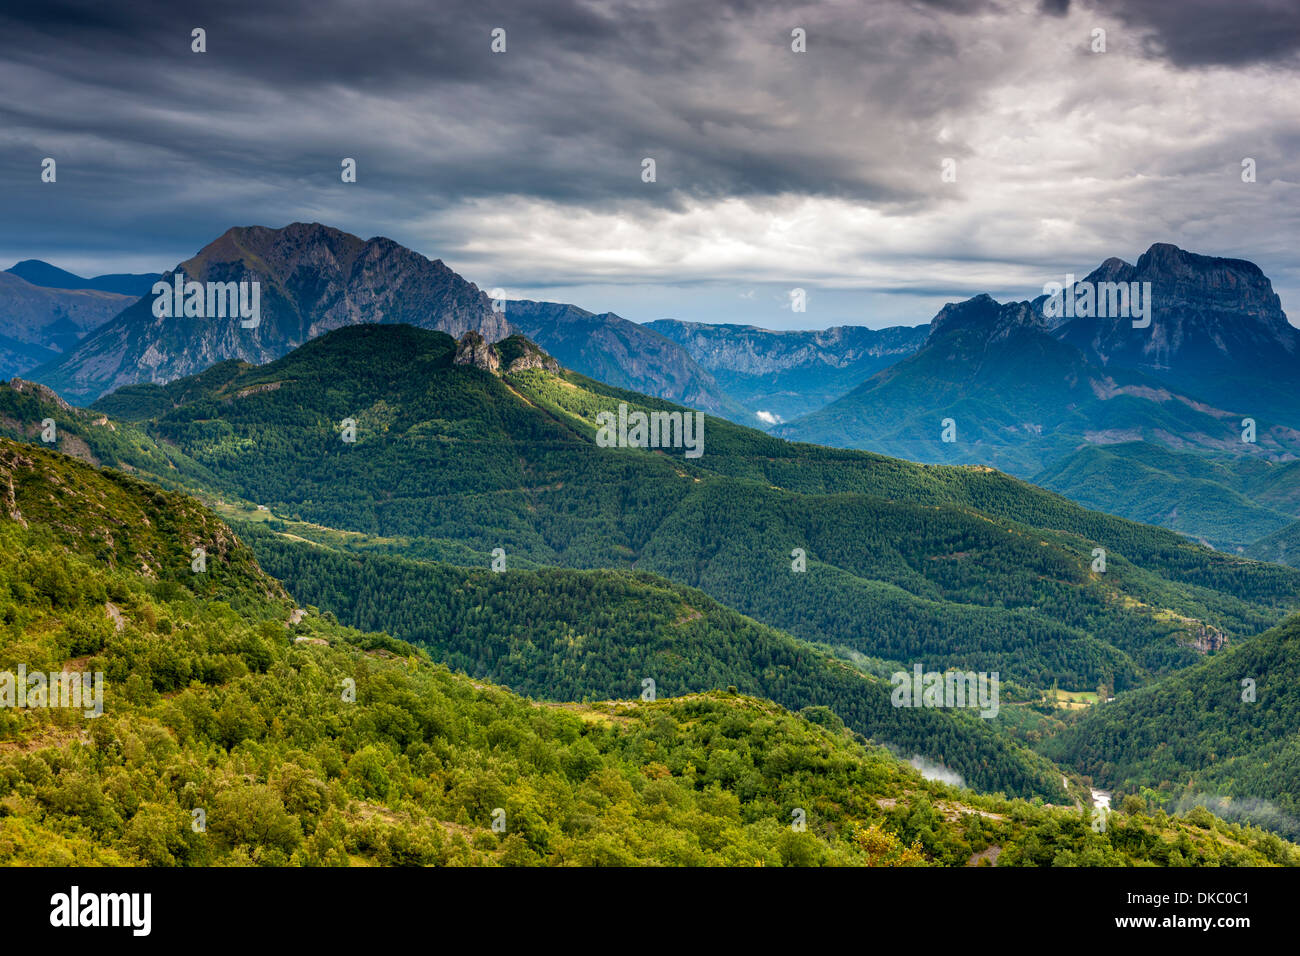 View from Revilla village, Huesca province, Aragon, Spain, Europe. Stock Photo